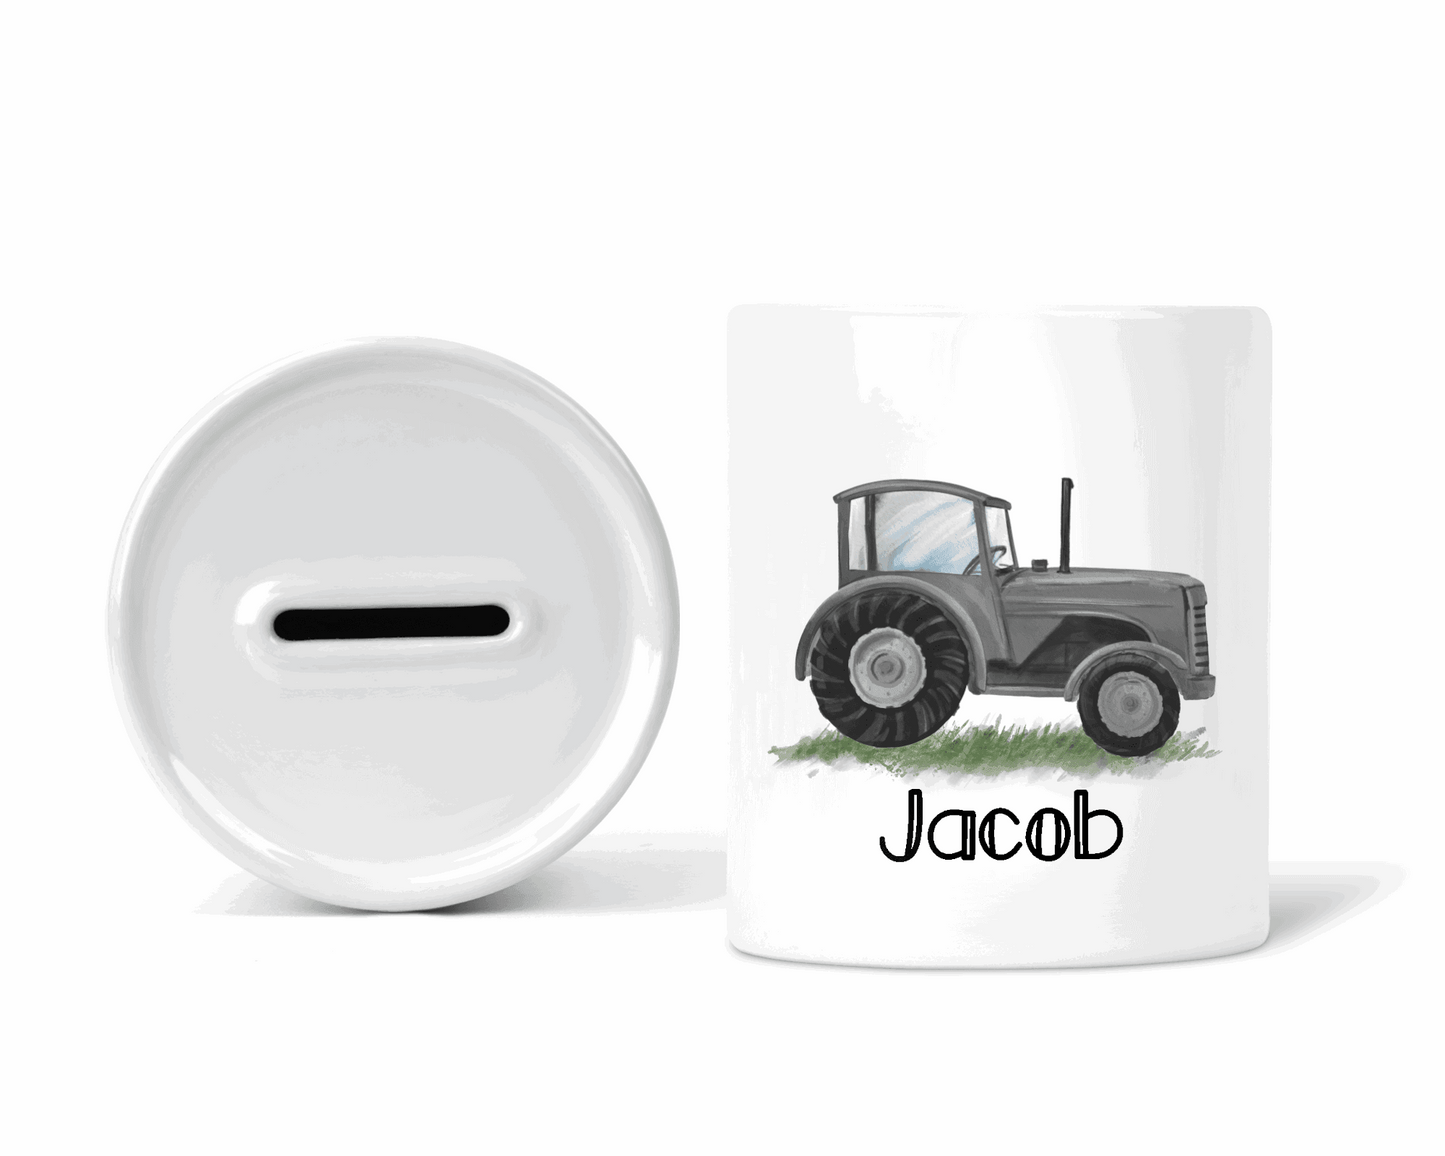 Grey tractor personalised money box - Sew Tilley